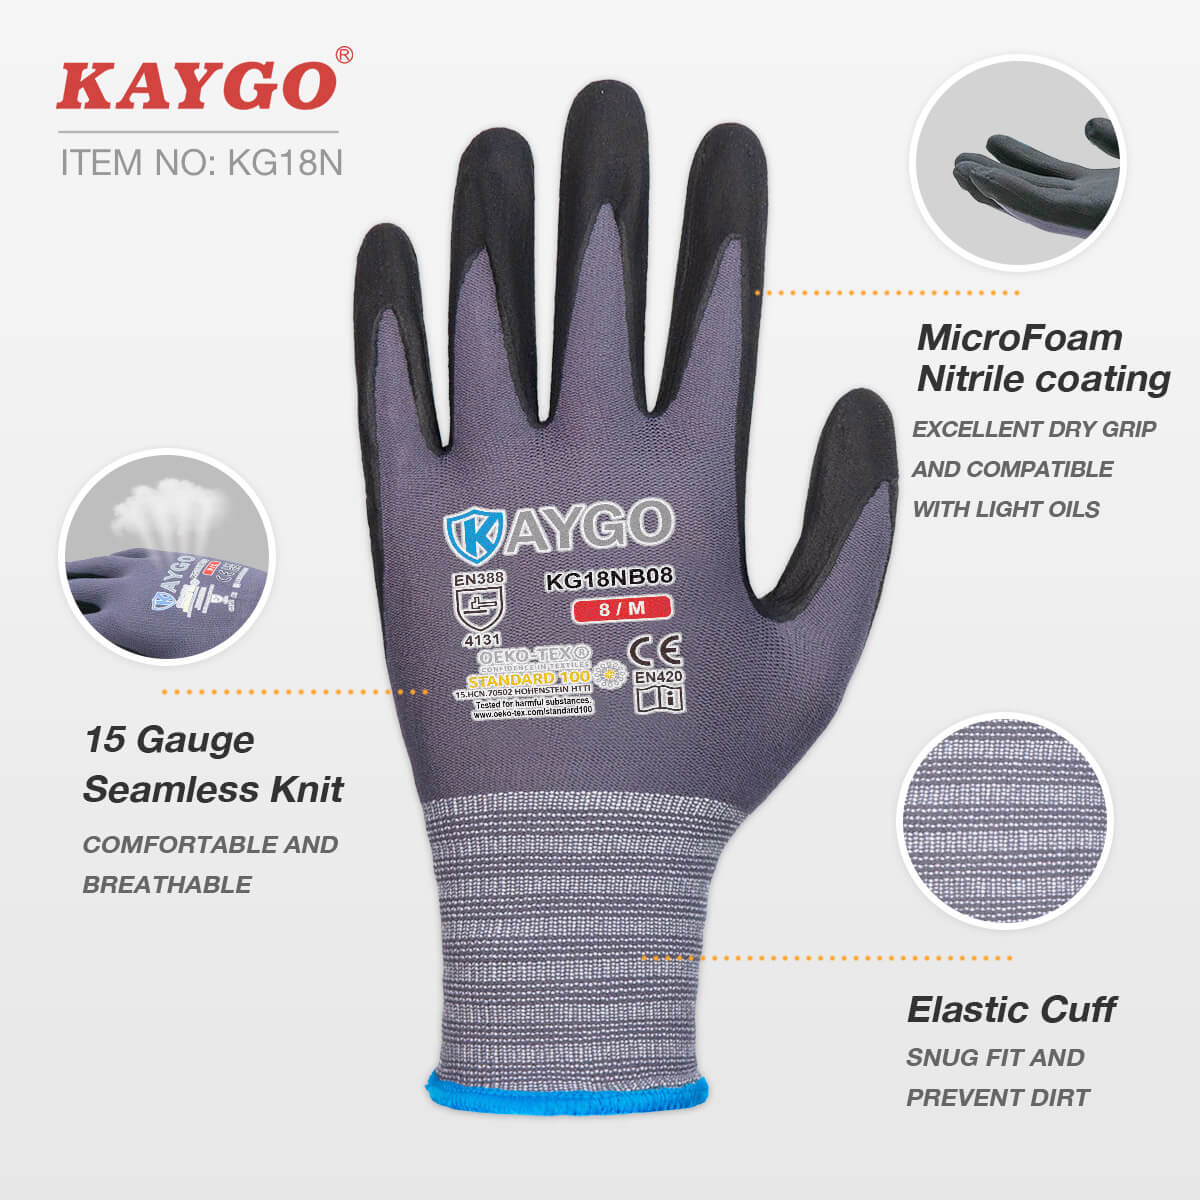 KAYGO Safety Work Gloves Microfoam Nitrile Coated-3 Pairs, KG18NB,Seamless Knit Nylon Glove with Black Micro-Foam Nitrile Grip,Ideal for General